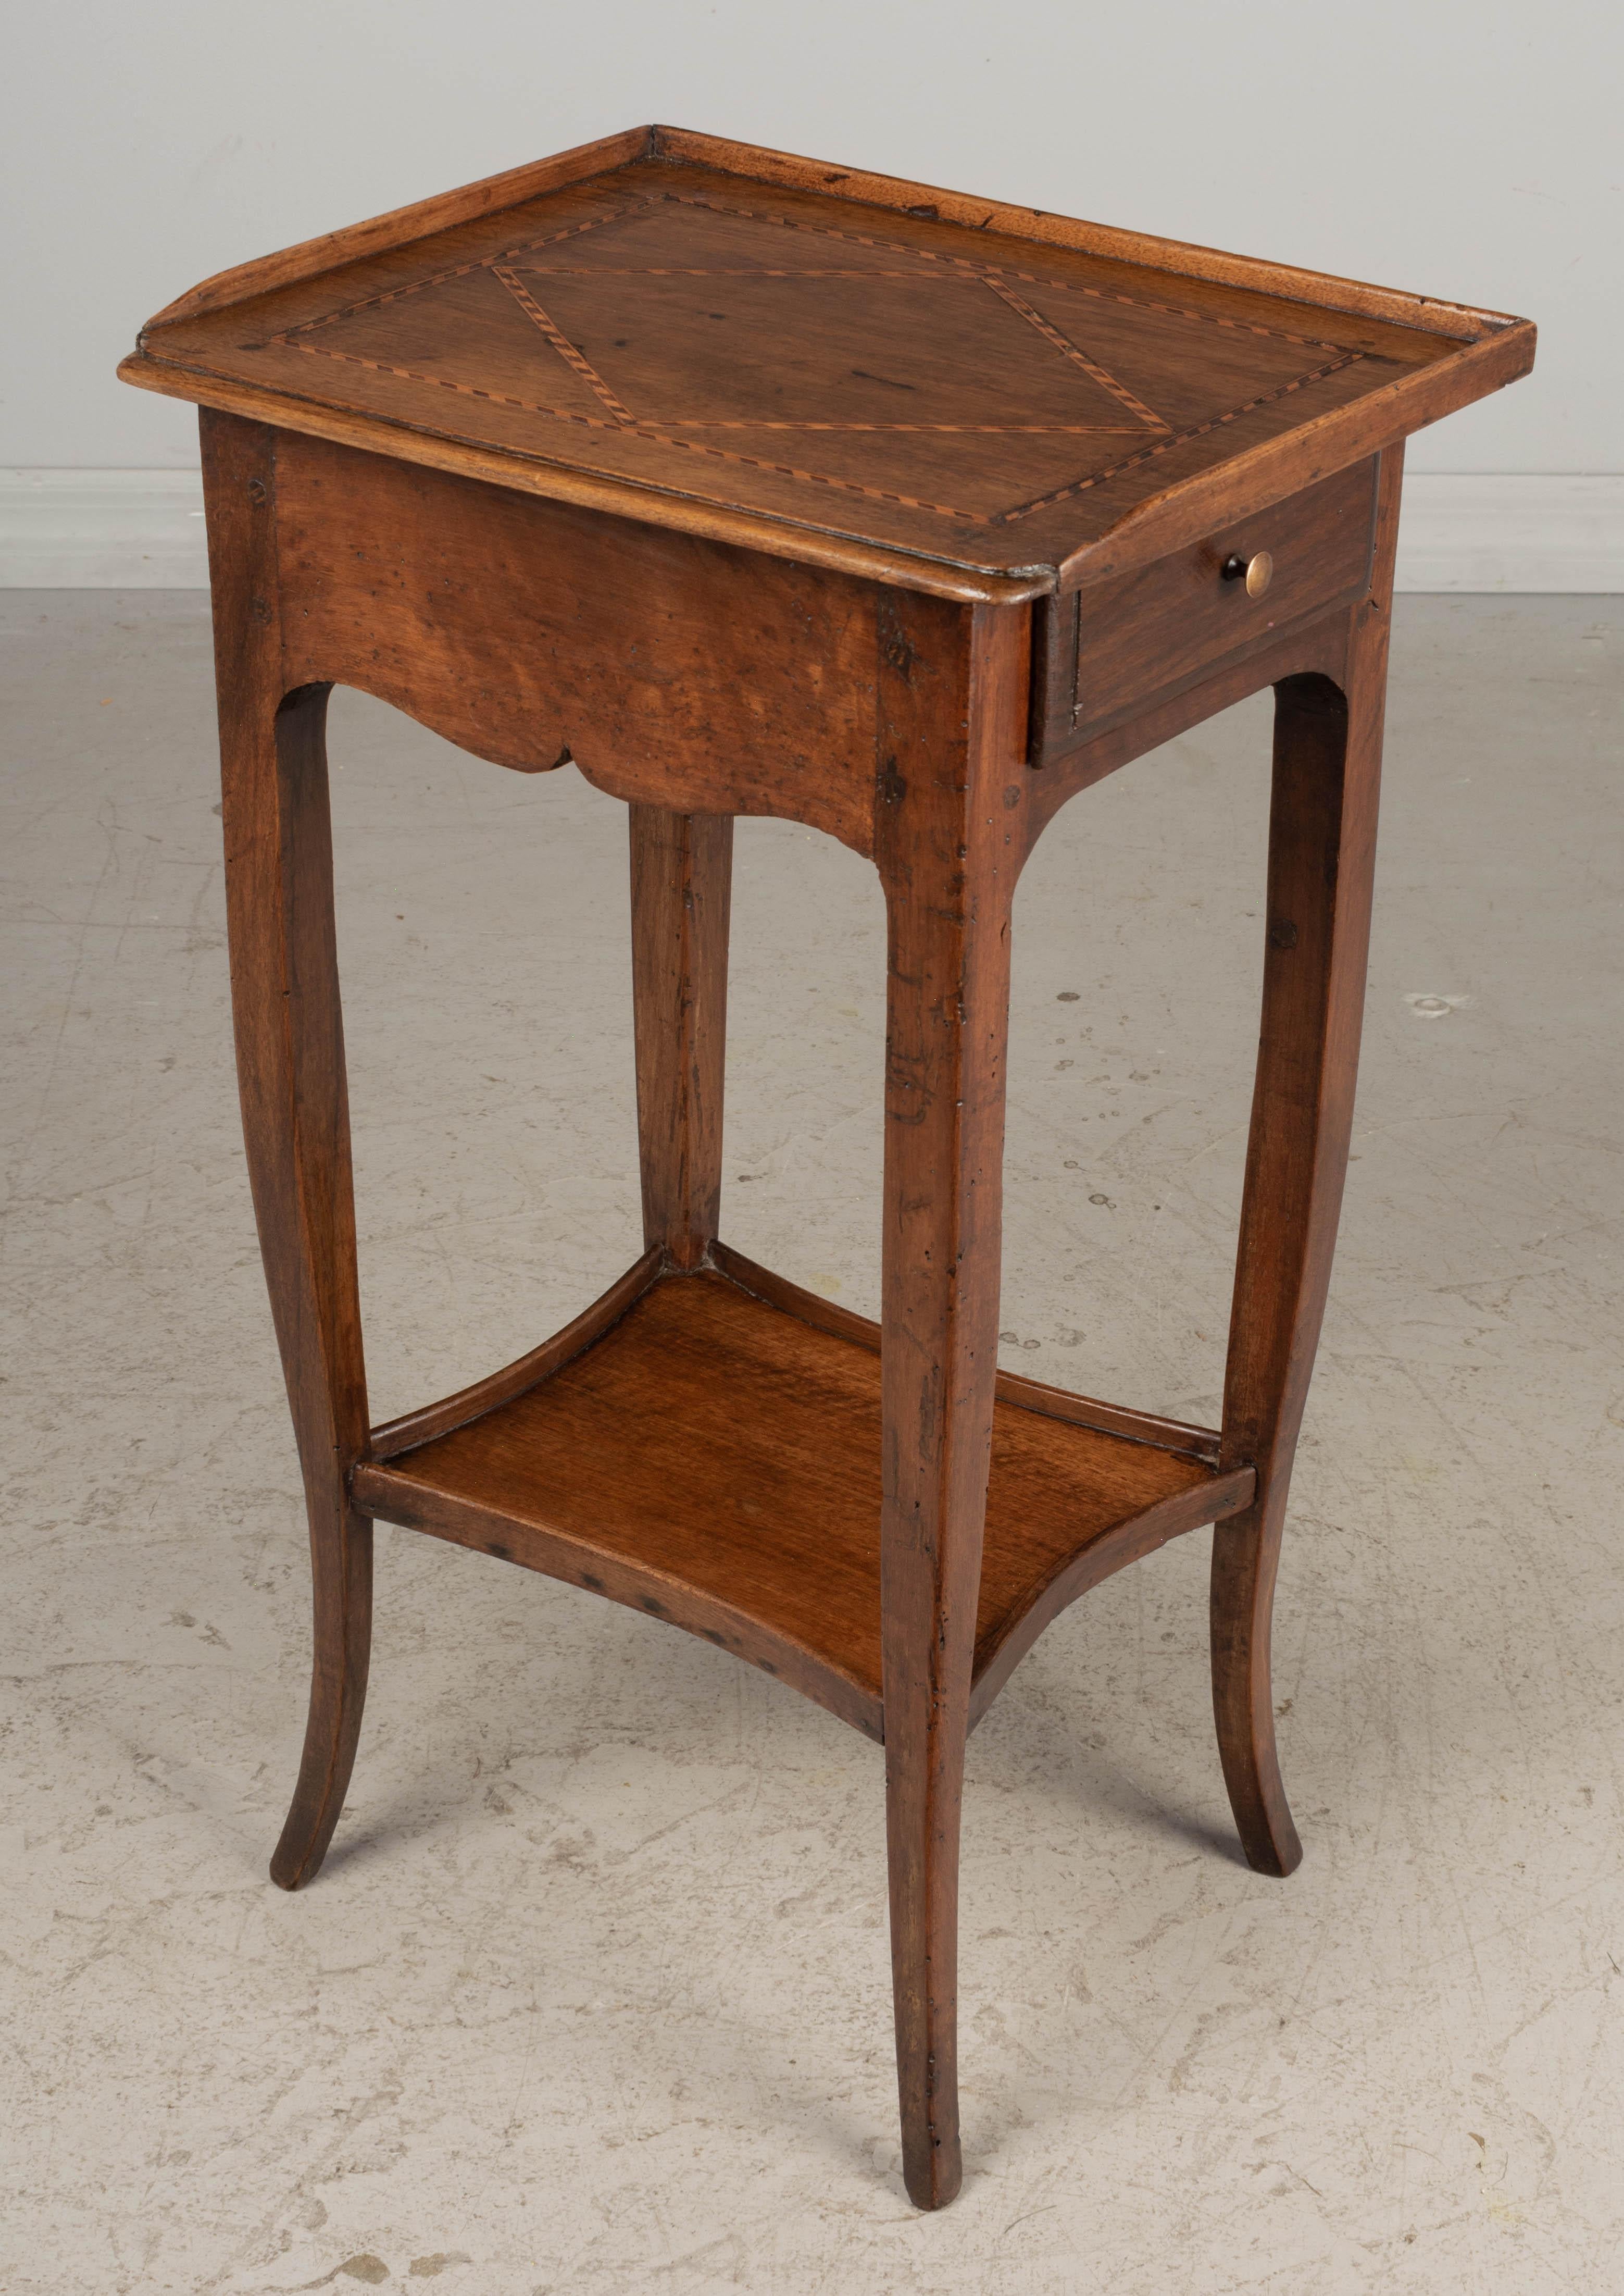 A French Louis XV style writing or side table made of solid walnut. Single dovetailed drawer on the right side. Top has marquetry inlaid detail and curved front corners with wood trim gallery on three sides. Elegant curved legs and lower shelf. All